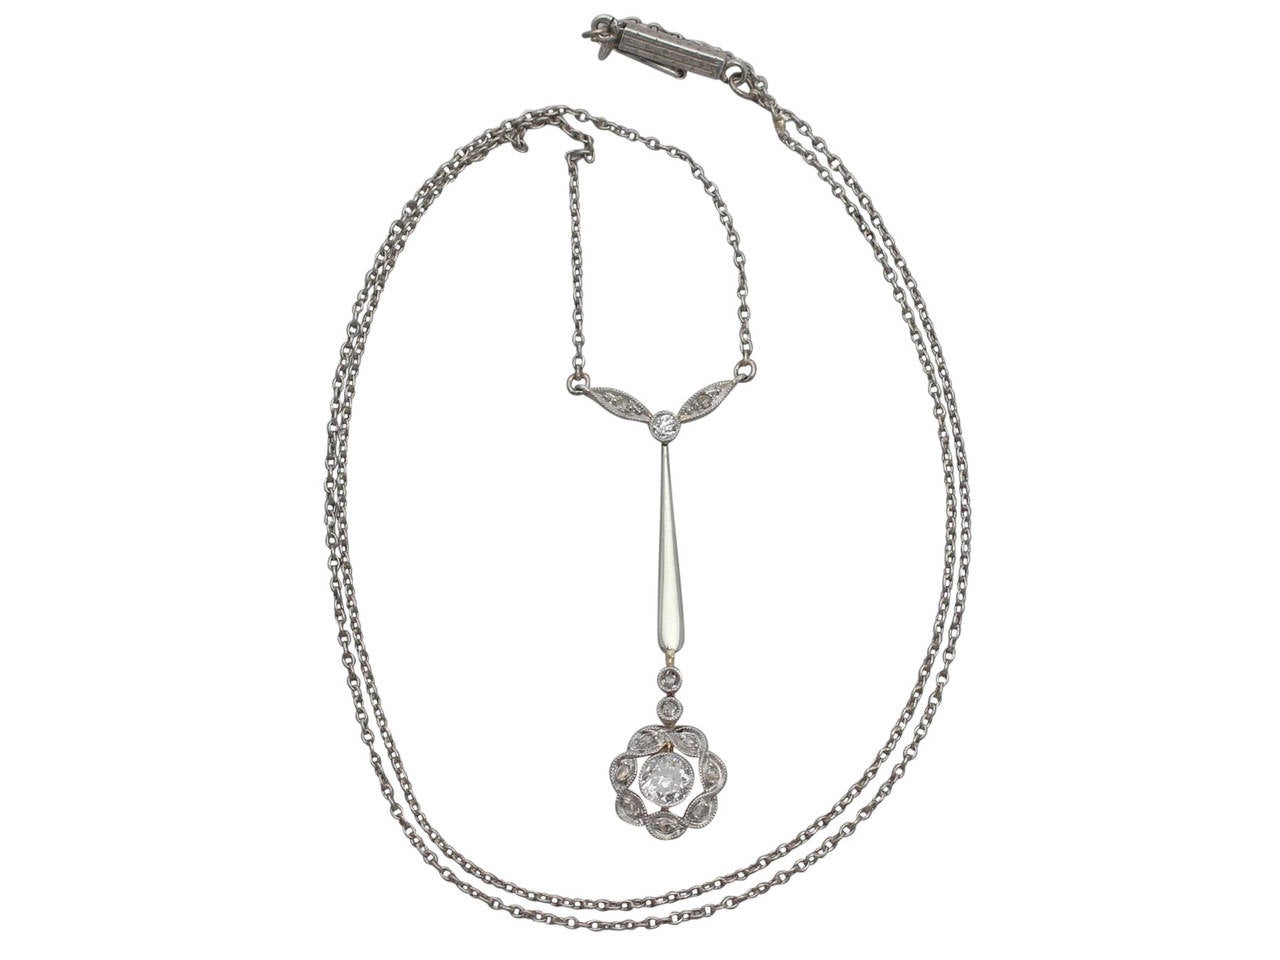 A fine and impressive antique 0.57 carat diamond and 18 karat yellow gold, 18 karat white gold set pendant with an integrated white gold chain; part of our antique jewellery and estate jewelry collections.

This impressive antique diamond pendant